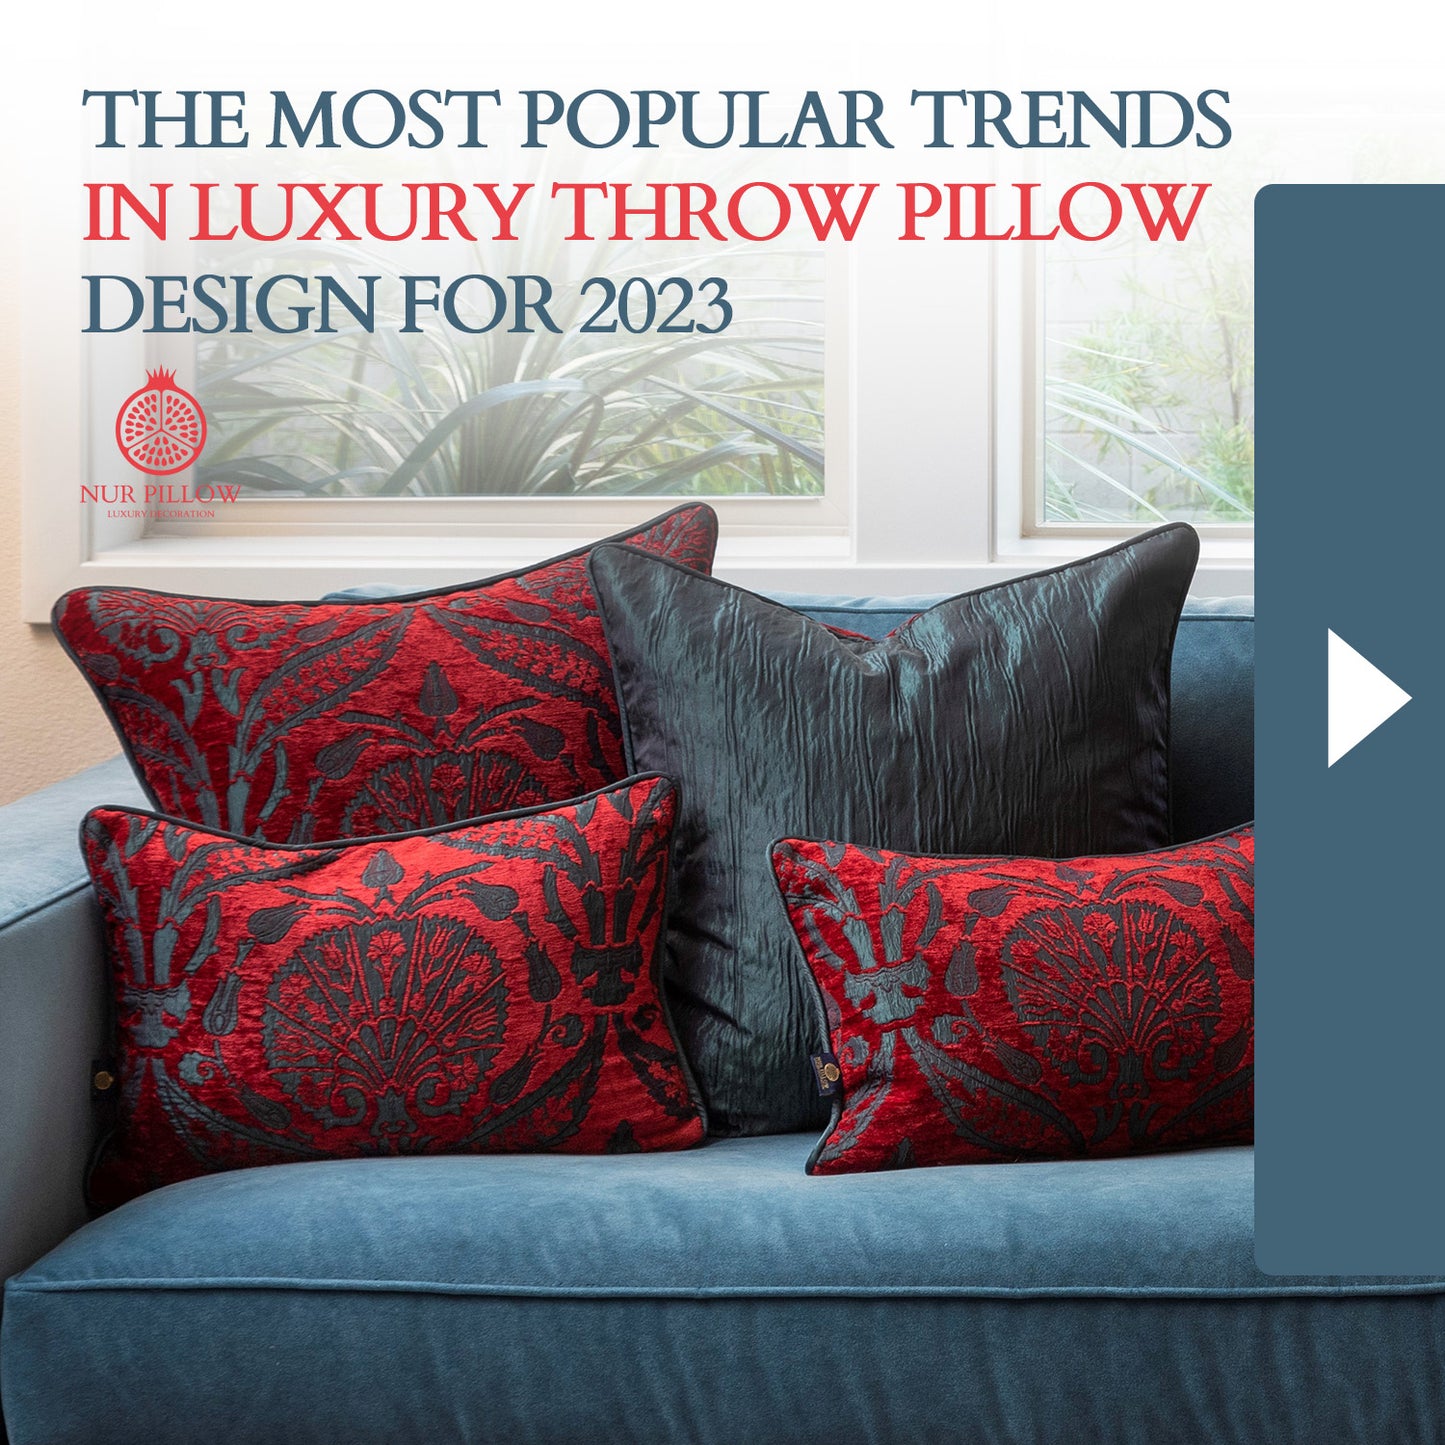 9 Unbelievable Decorative Bed Pillows for 2023